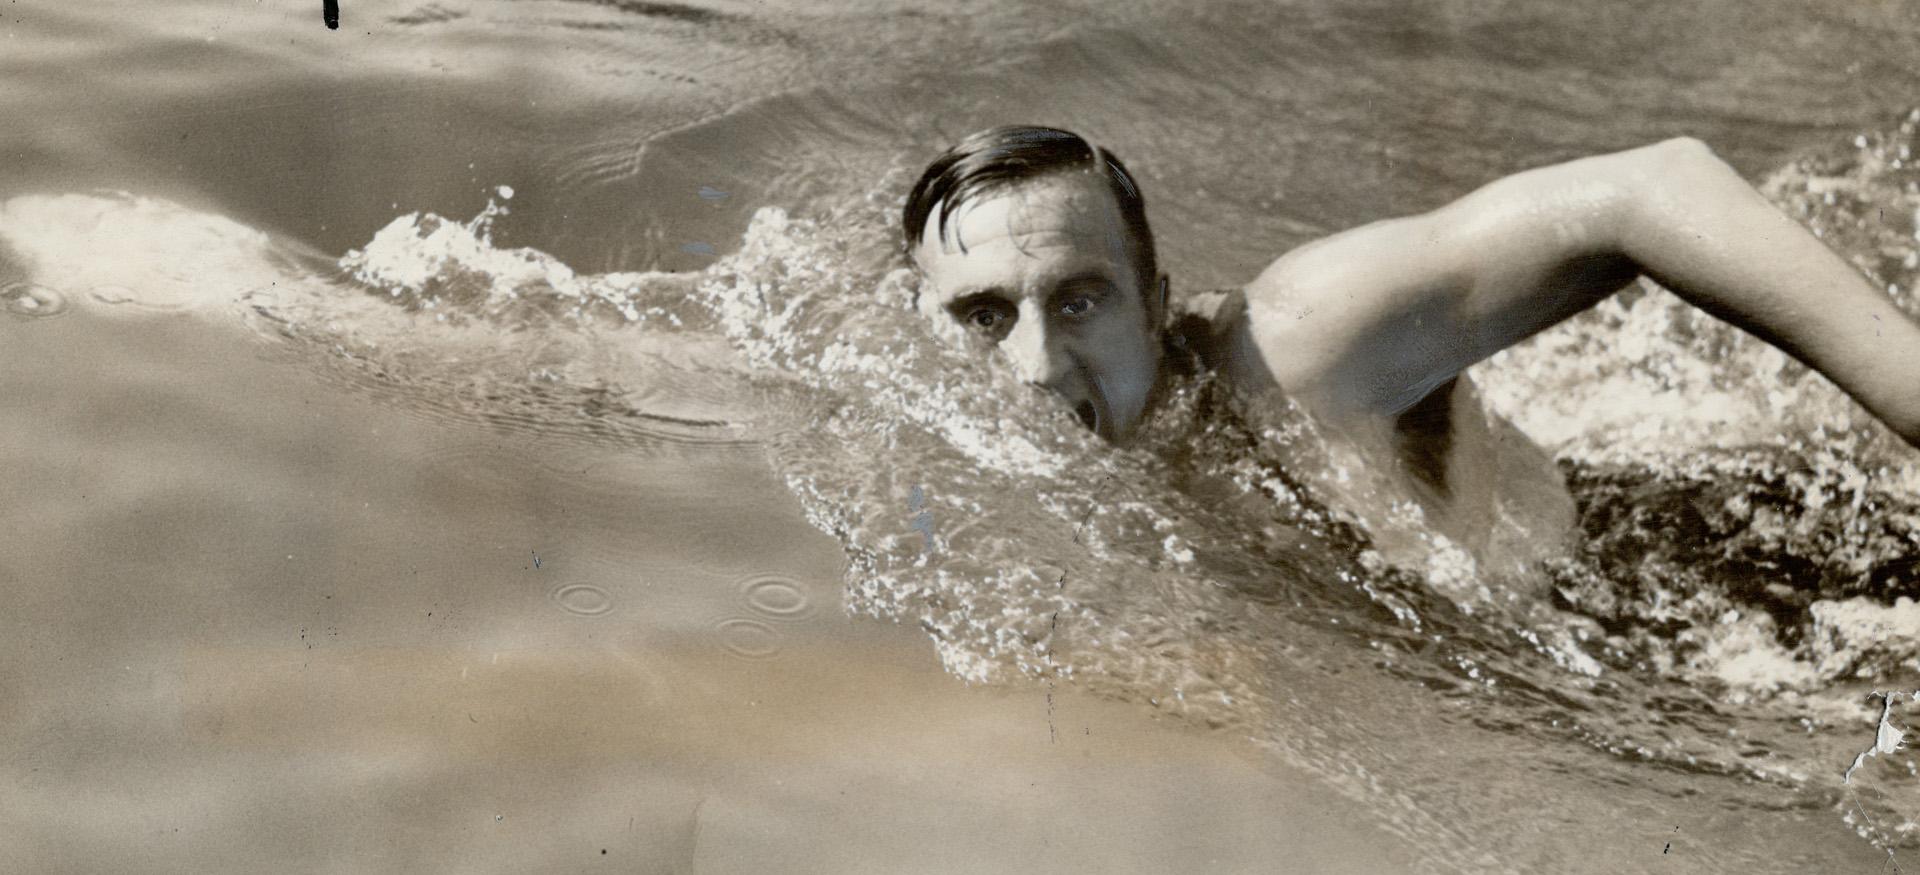 Ernst Vierkoetter, who rose to fame and fortune overnight when in 1927 he churned his way through the icy water of Lake Ontario to win the first C.N.E(...)